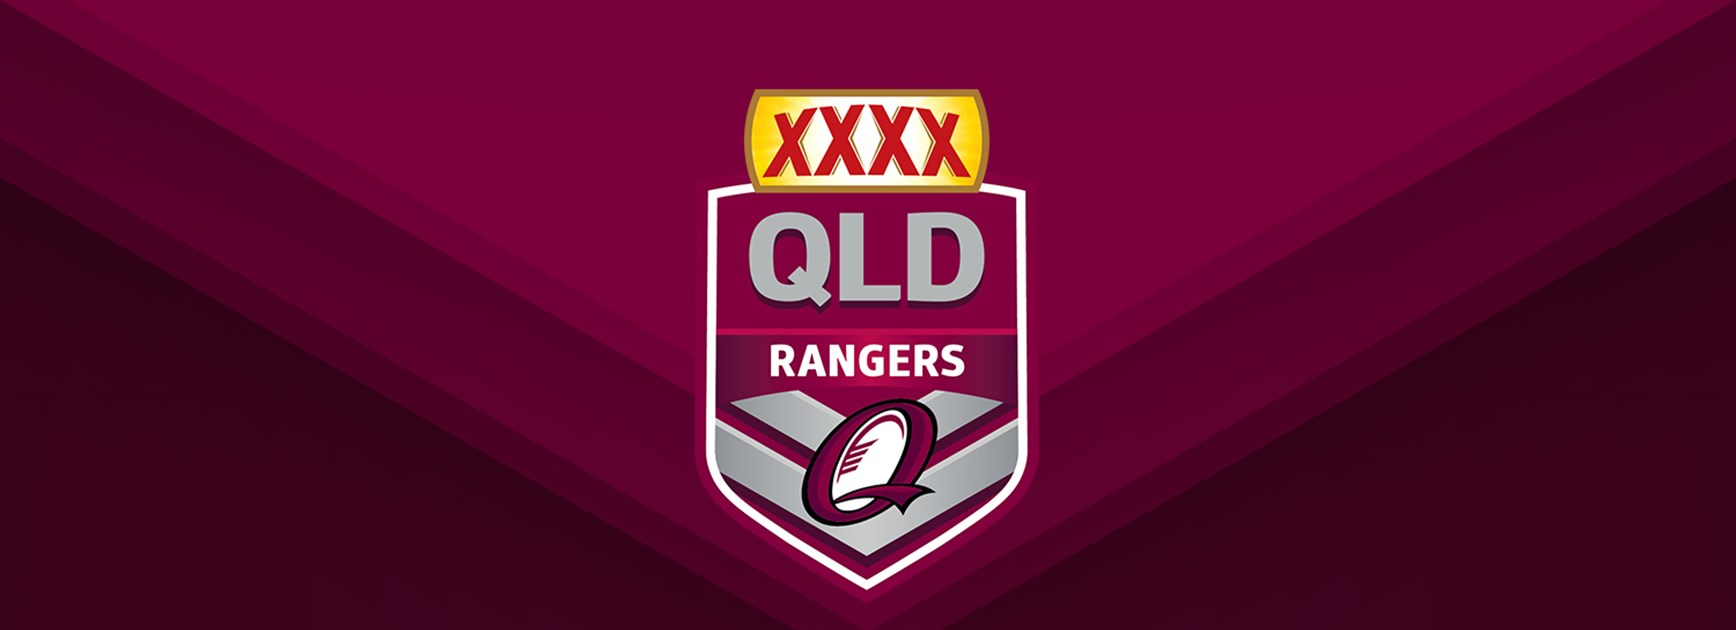 New faces for XXXX Queensland Rangers